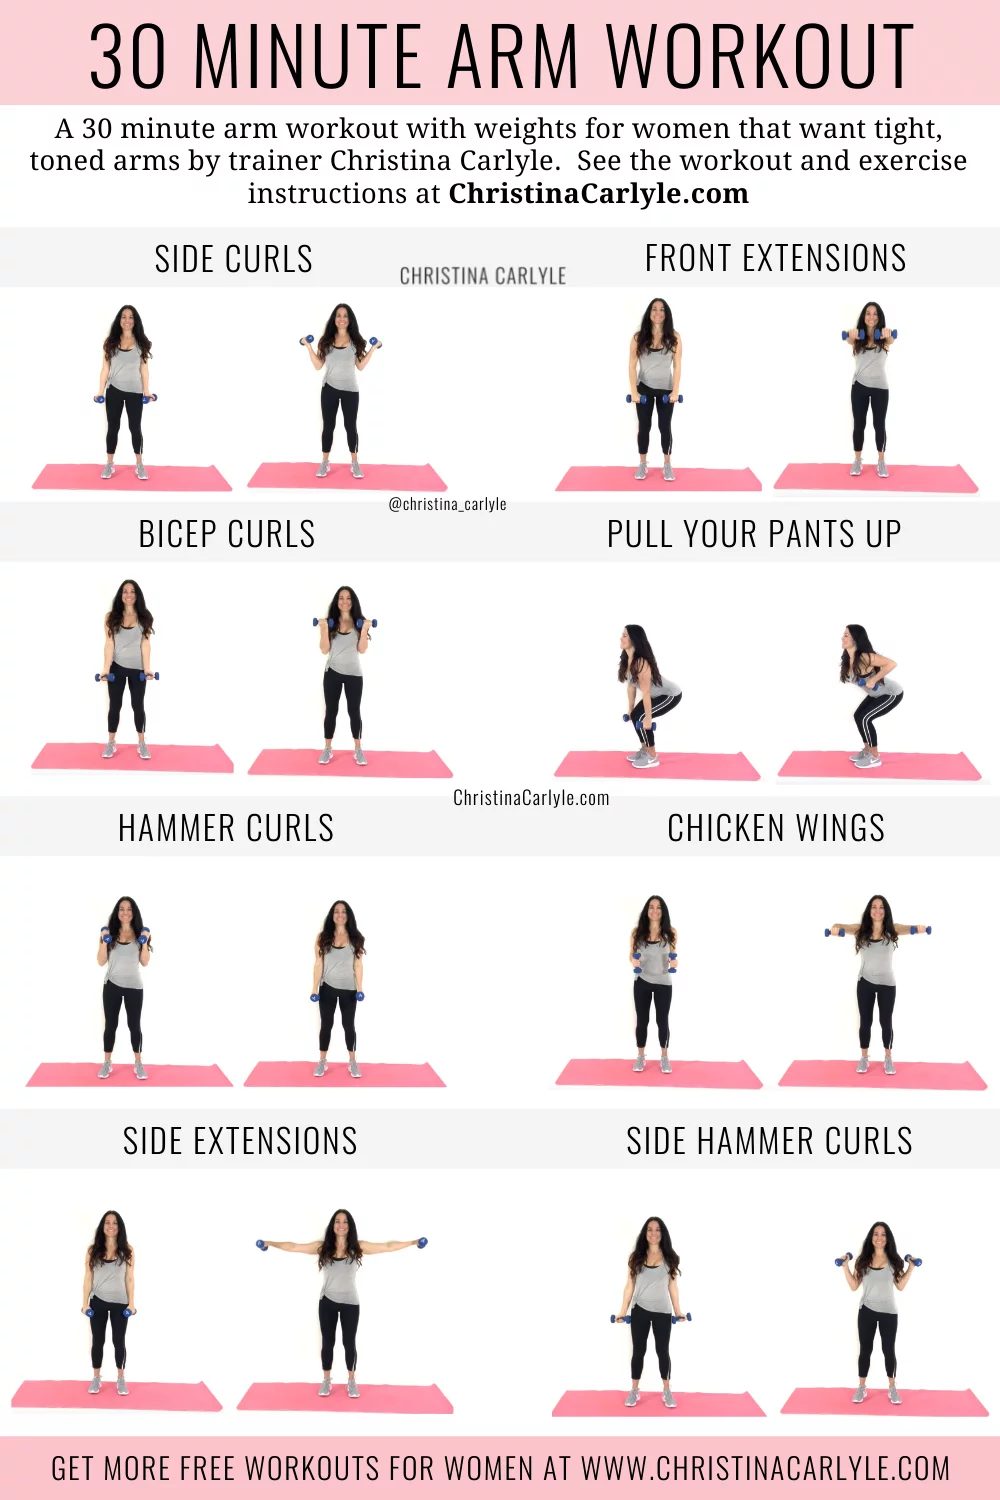 https://www.christinacarlyle.com/wp-content/uploads/2020/05/30-minute-arm-workout-Christina-Carlyle-1.png